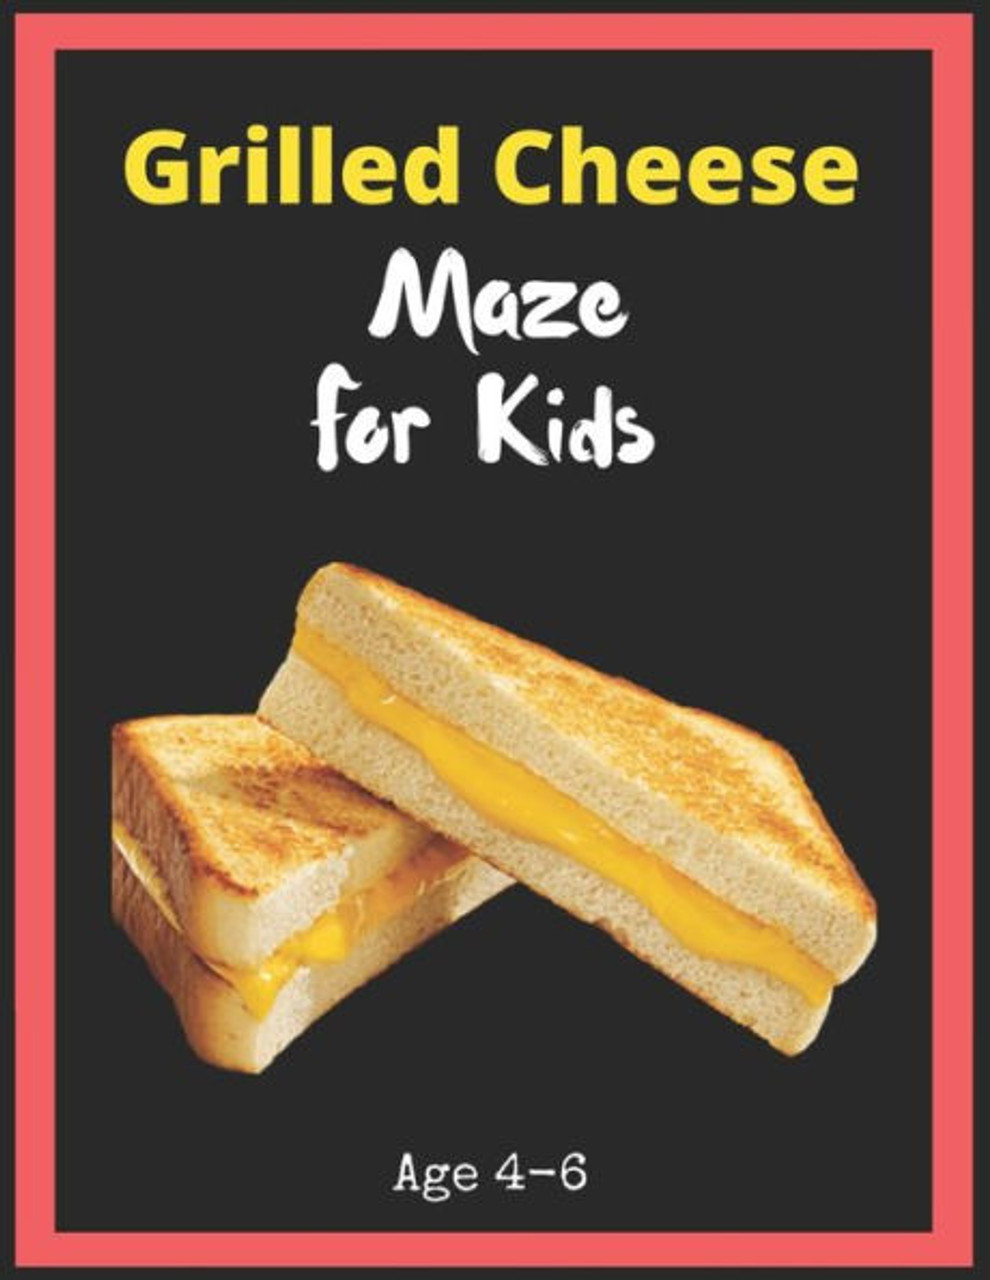 Grilled Cheese Maze For Kids Age 4-6: Maze Activity Book for Kids